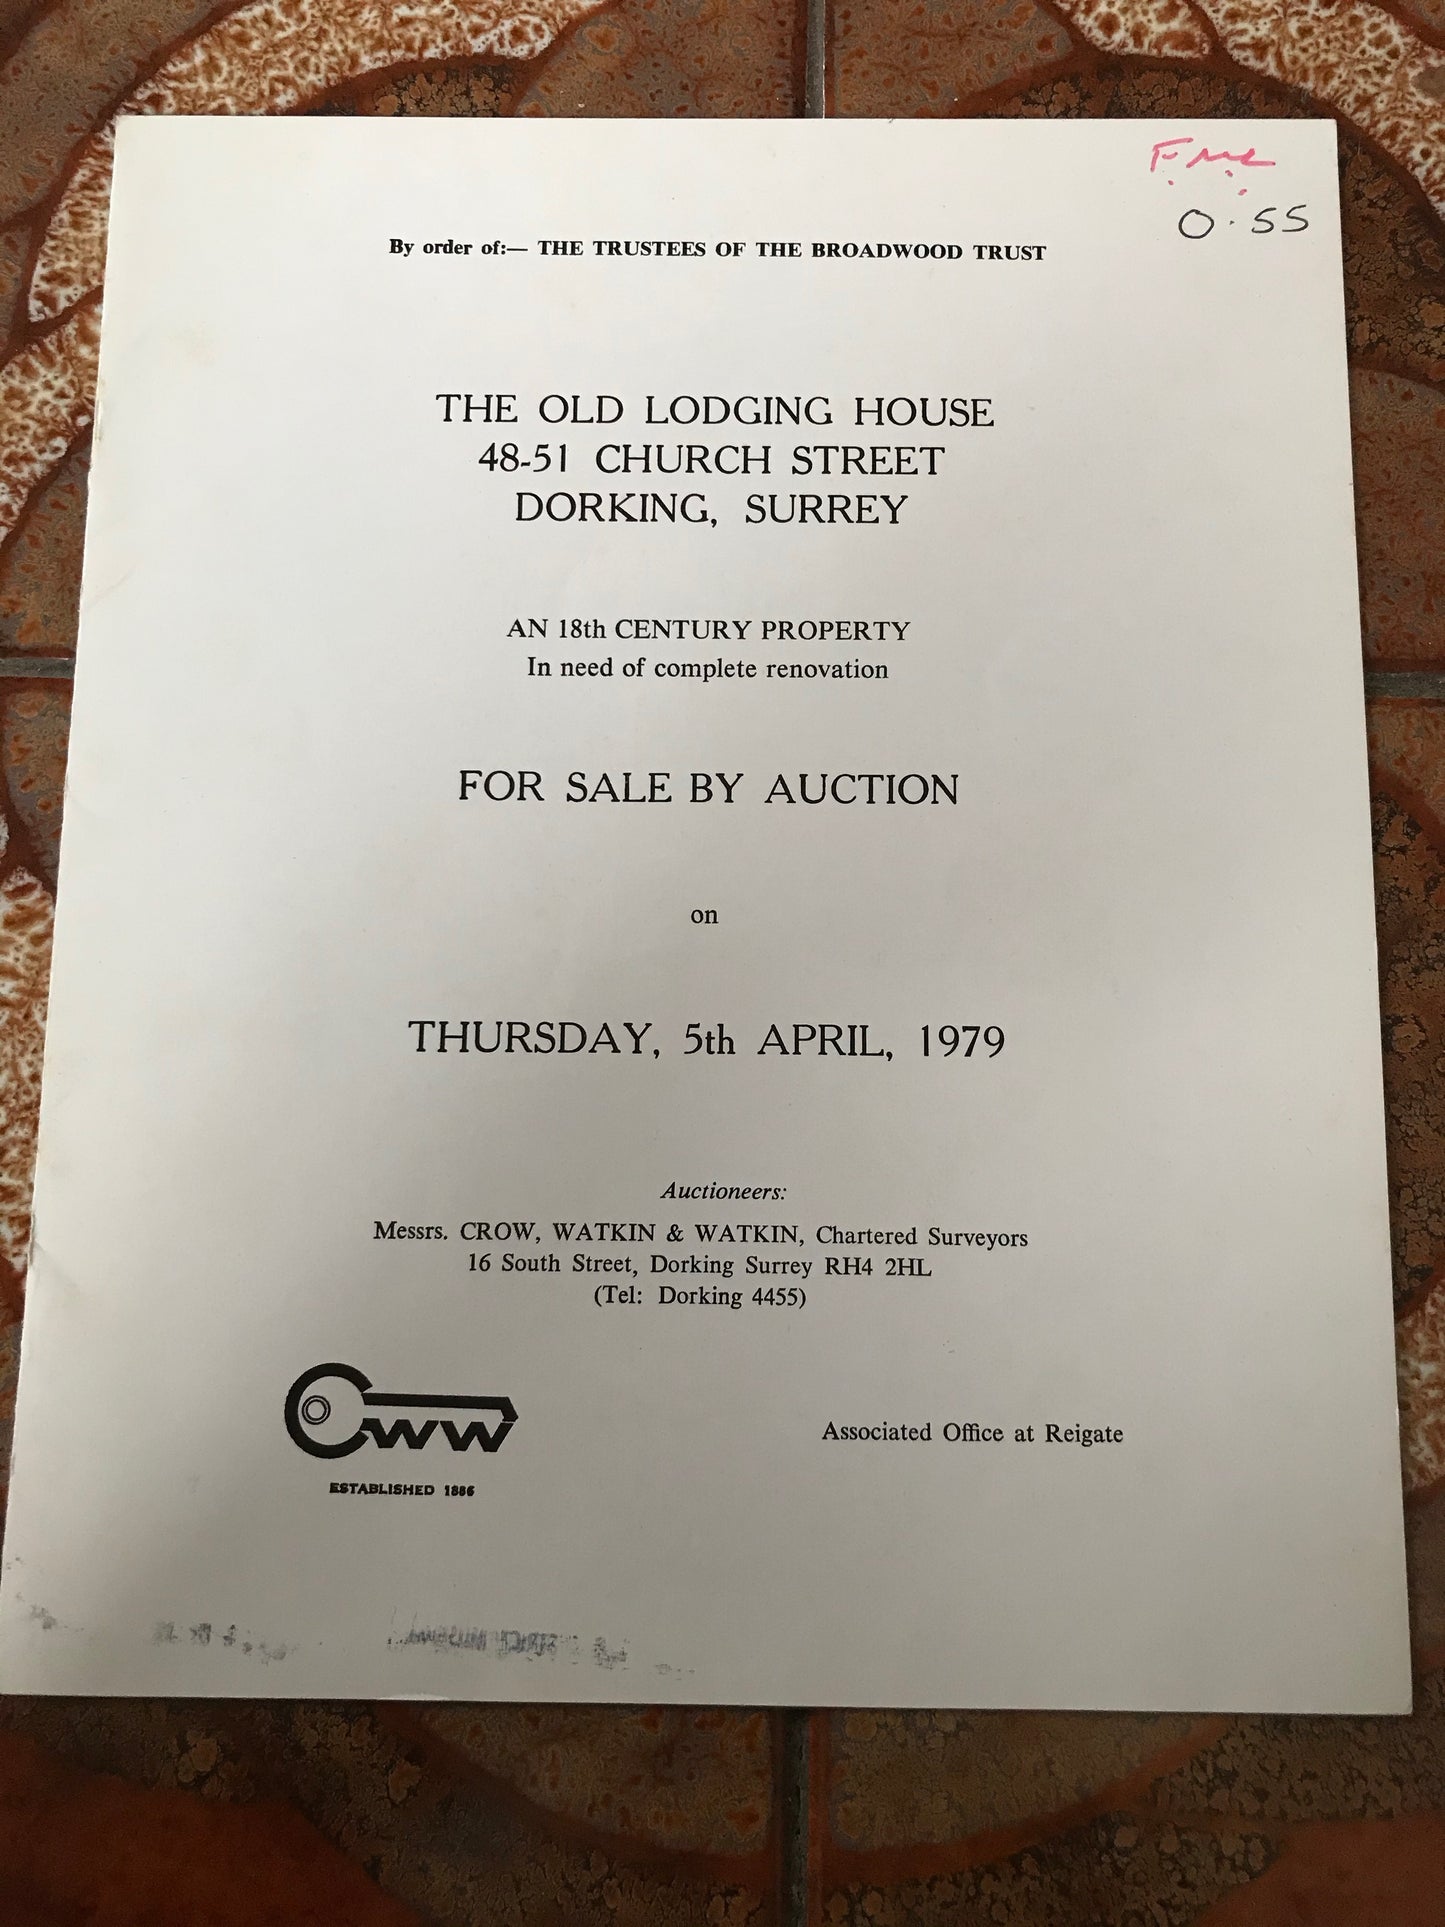 The Old Lodging House, 48-51 Church Street, Dorking, 1979 Sales Particulars